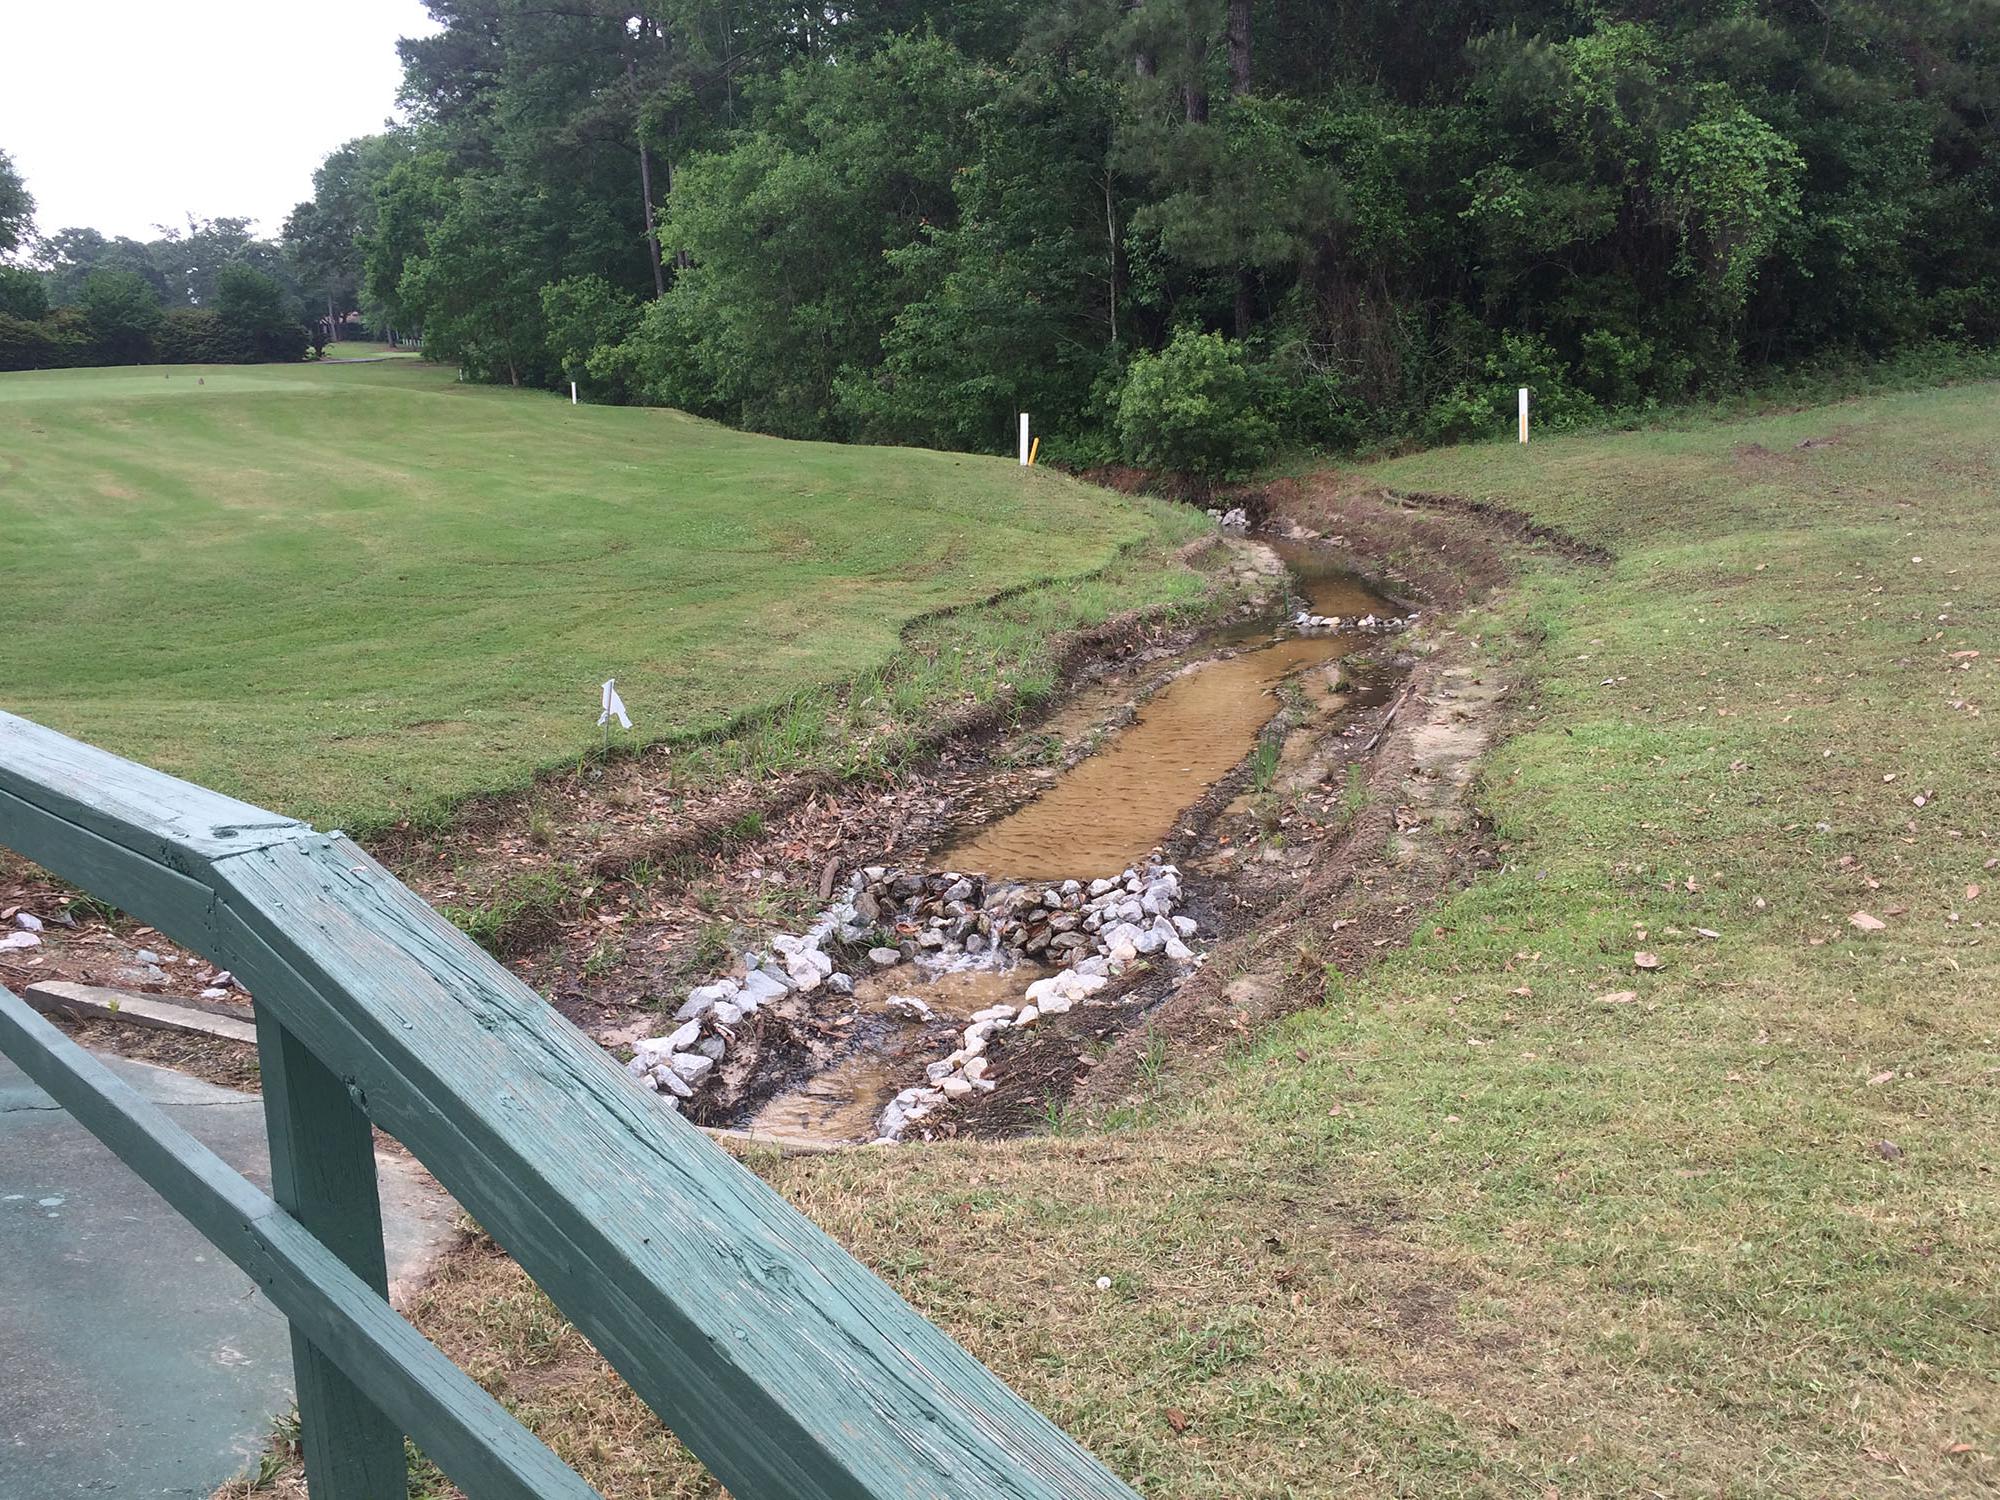 A Mississippi State University associate professor of landscape architecture, working with the Mississippi Water Resources Research Institute, designed this dry swale to reduce nonpoint-source pollution from runoff at a south Mississippi golf course. (Photo by MSU Extension Service/Beth Baker).